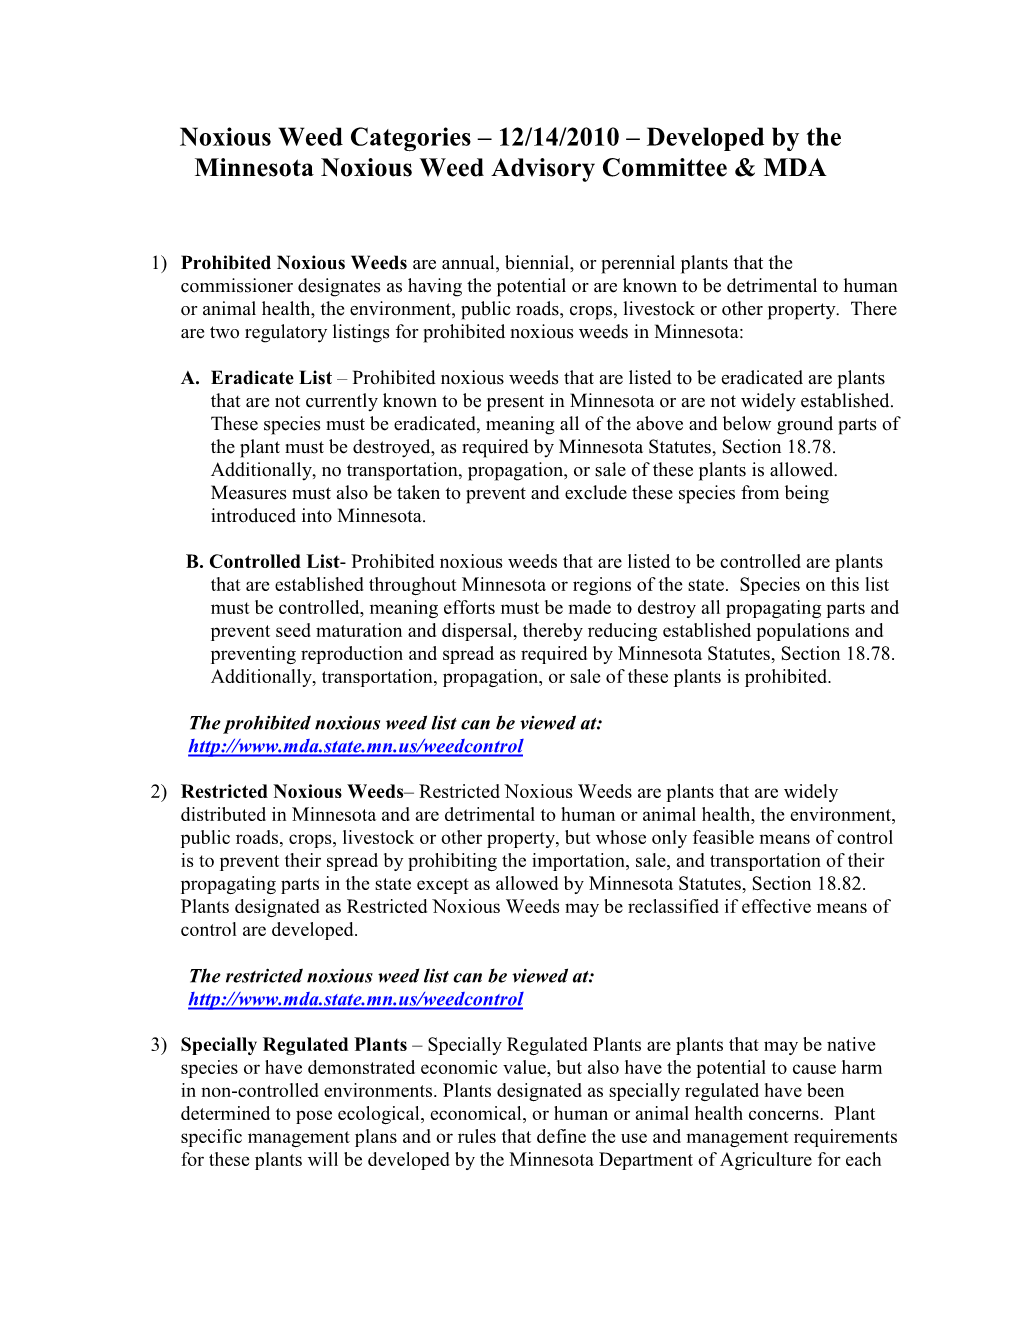 Noxious Weed Categories – 12/14/2010 – Developed by the Minnesota Noxious Weed Advisory Committee & MDA